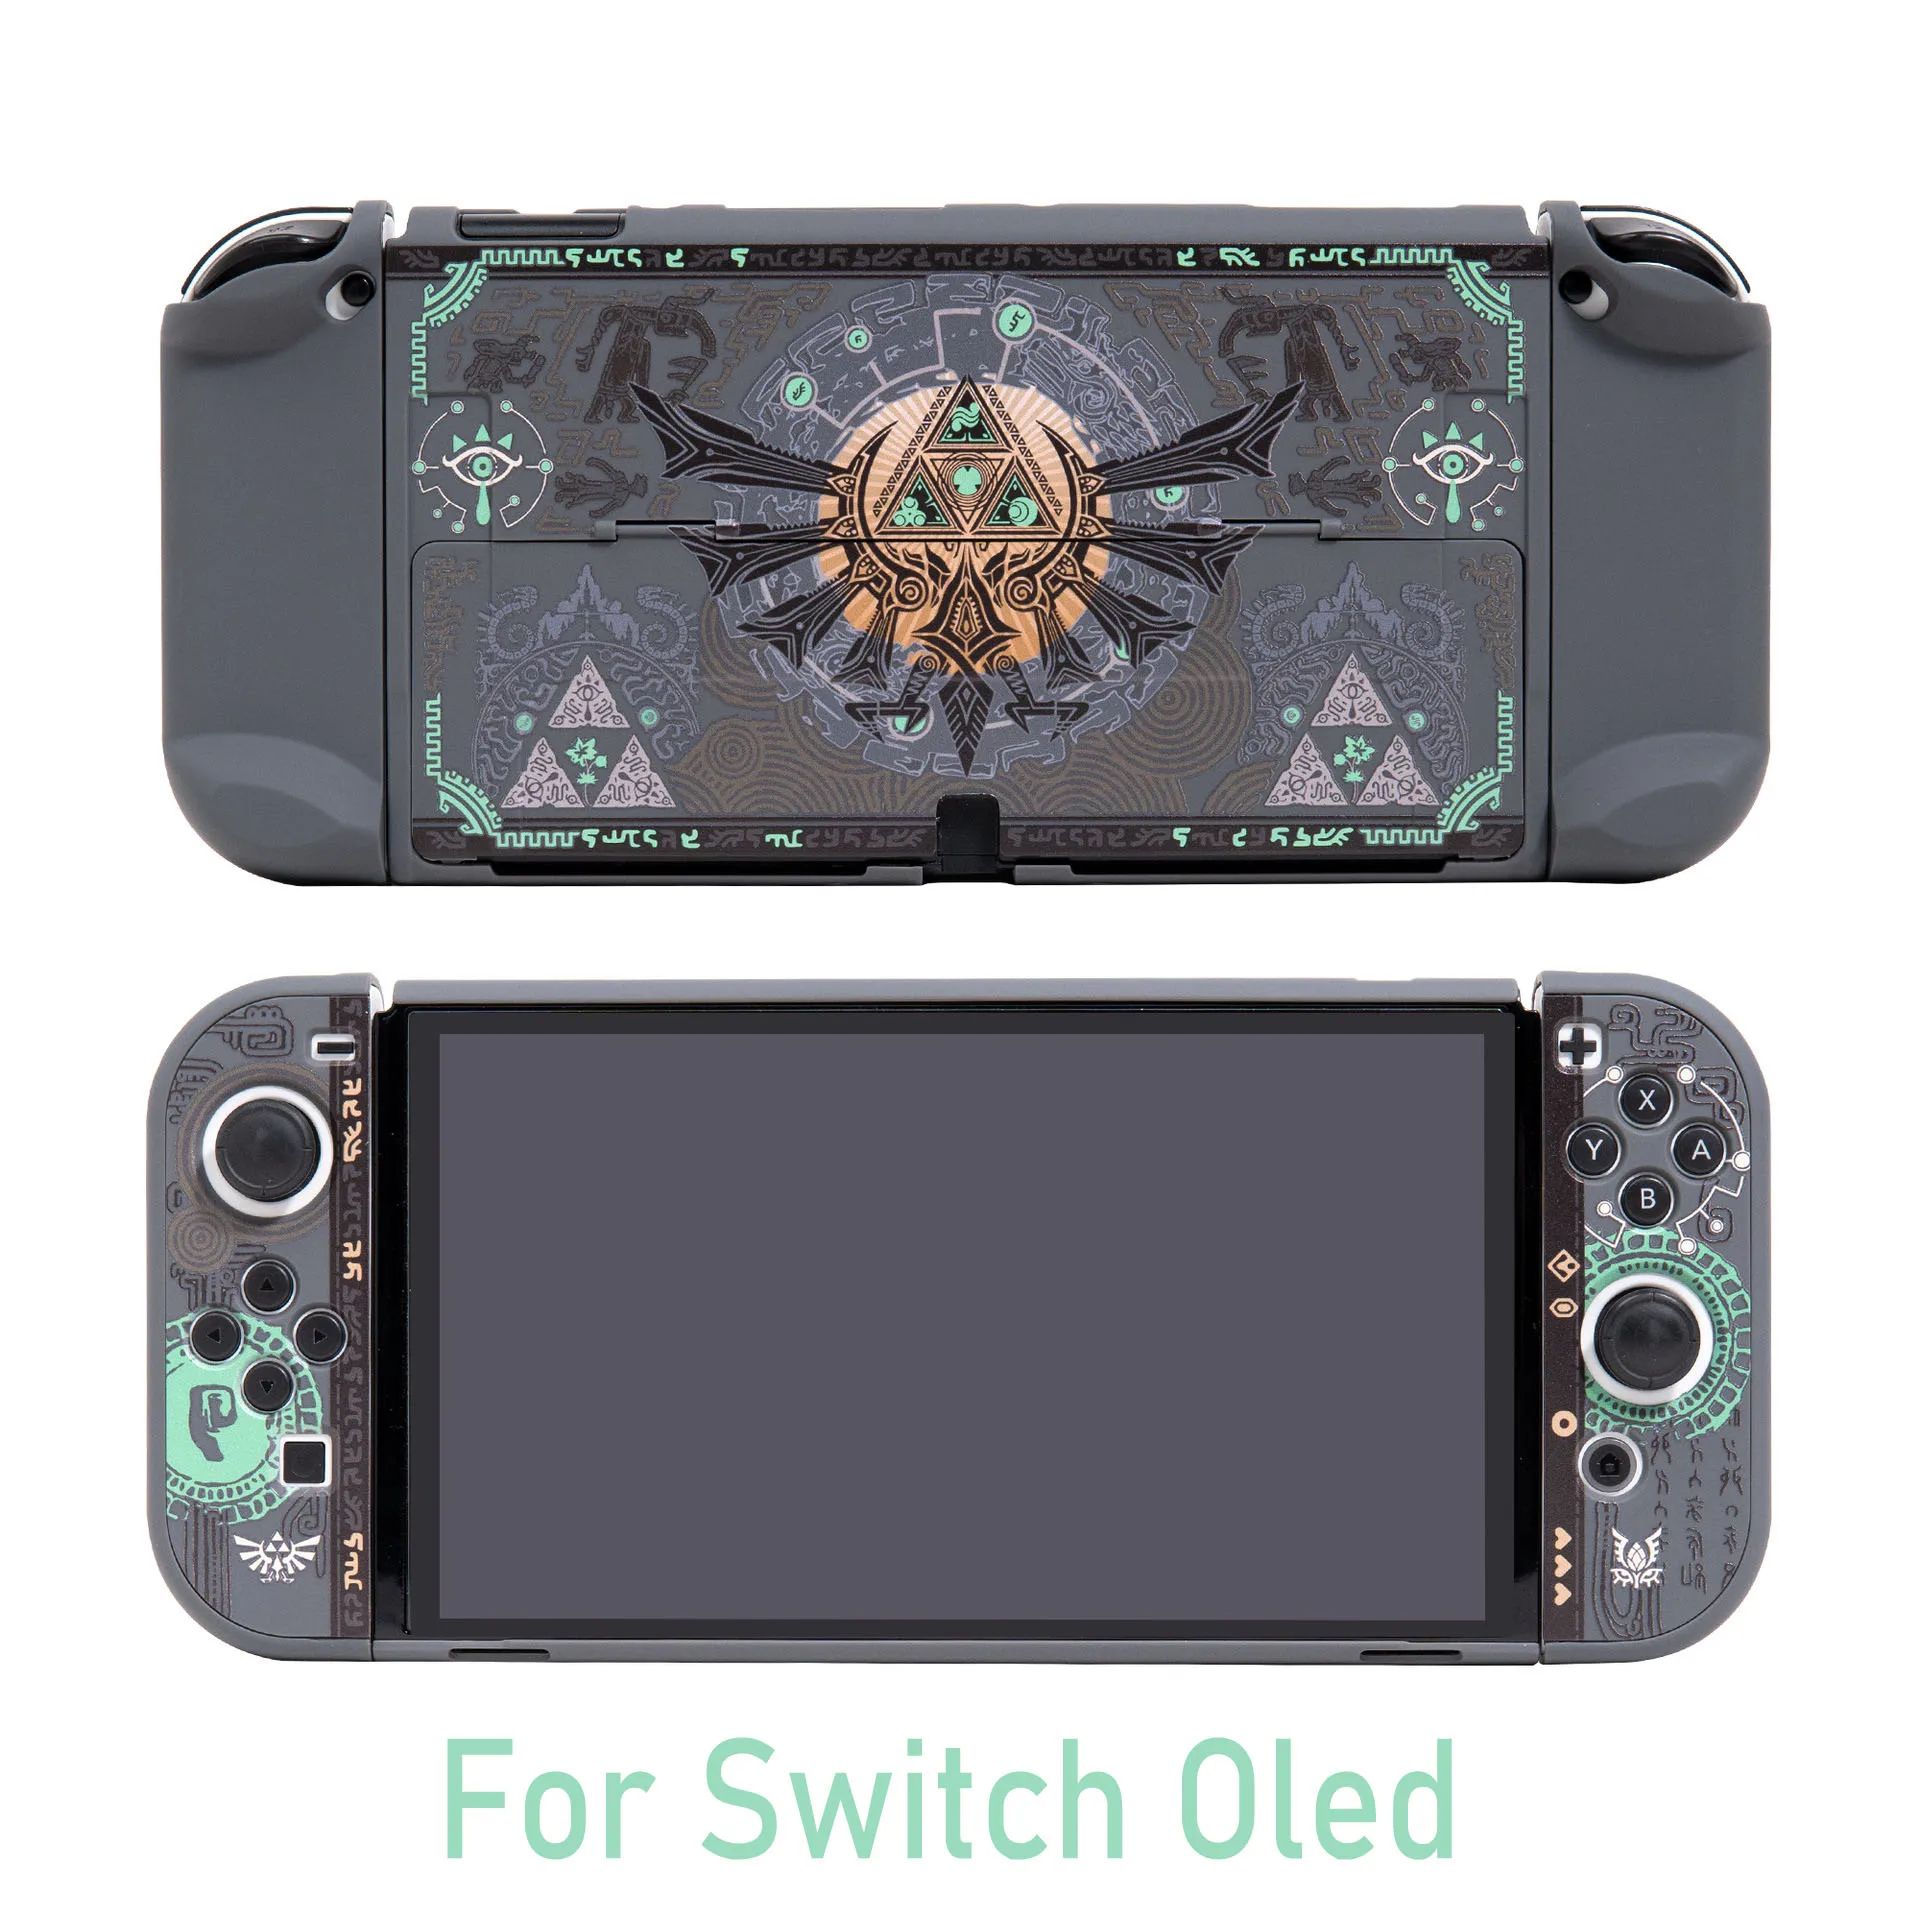 Color:For Switch Oled